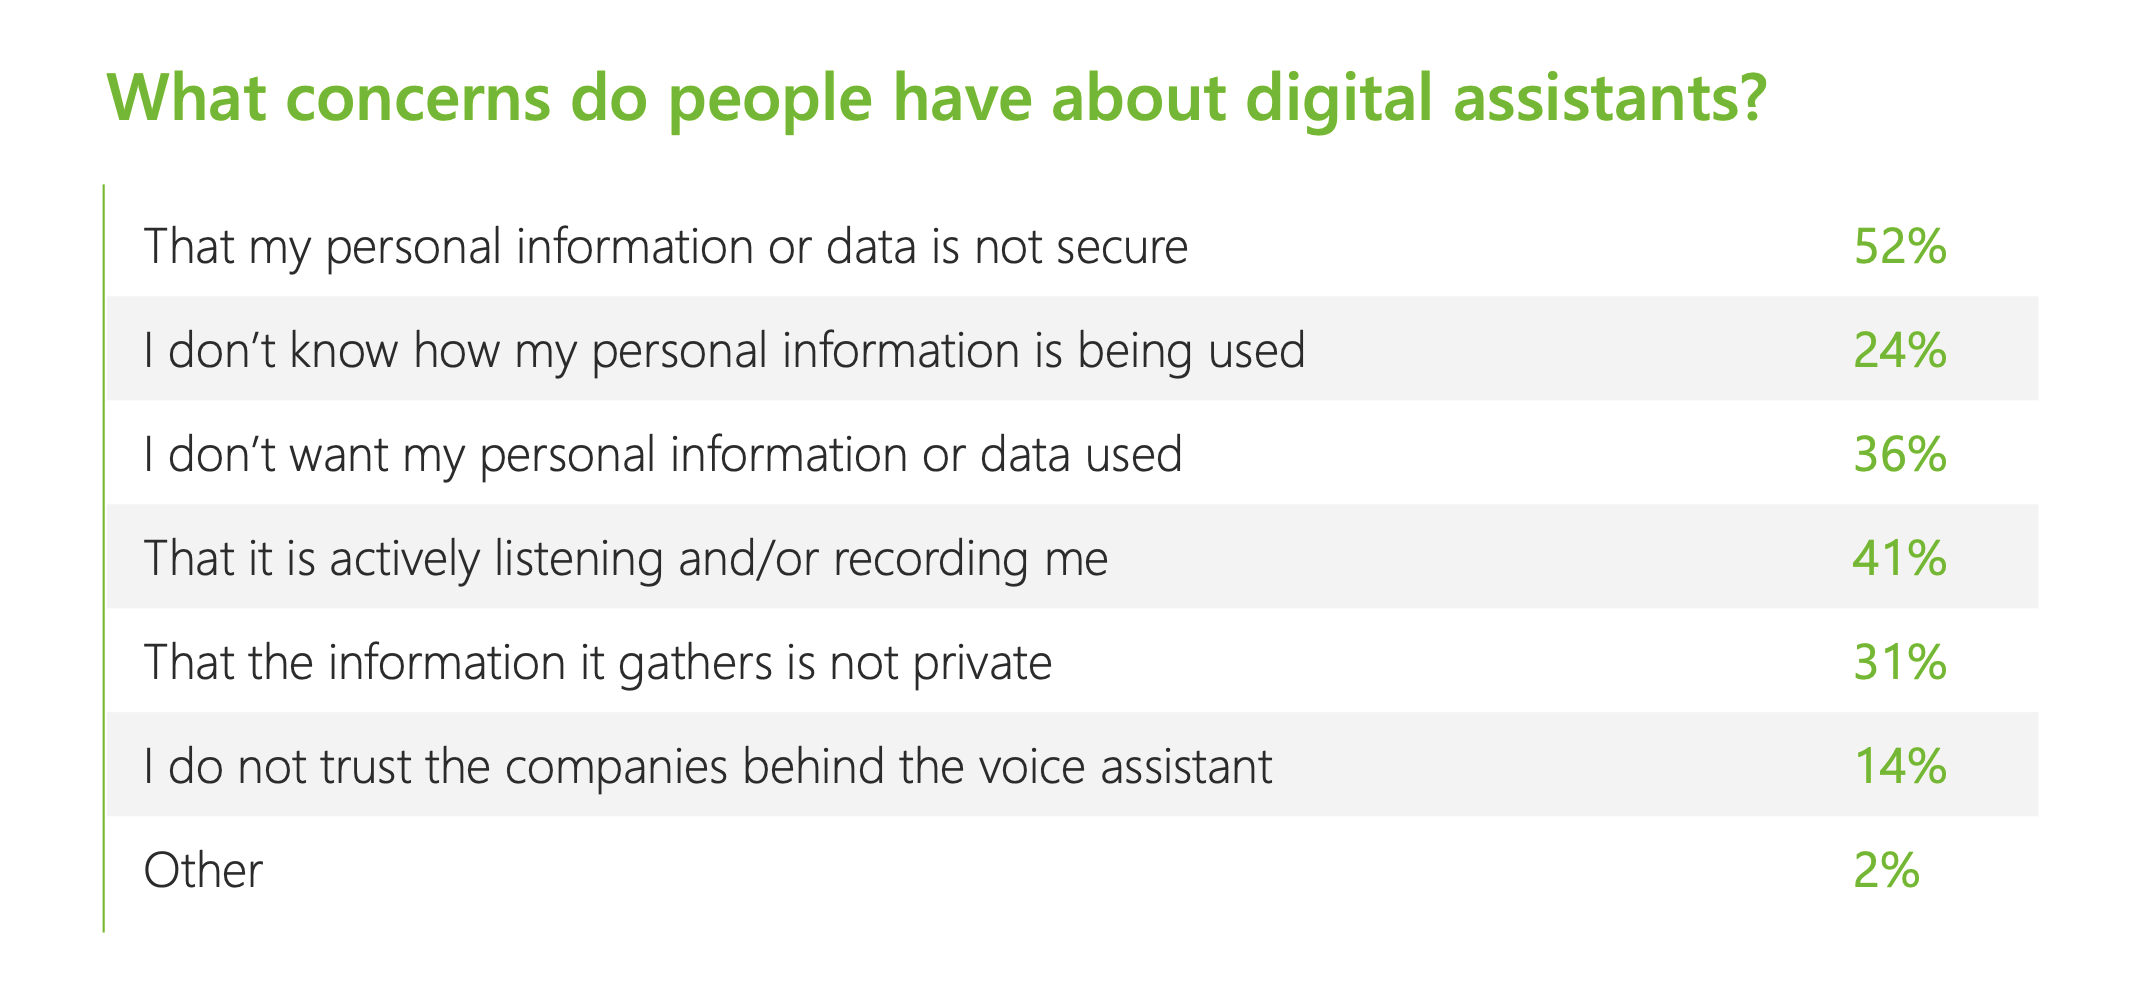 List of common concerns about digital assistants